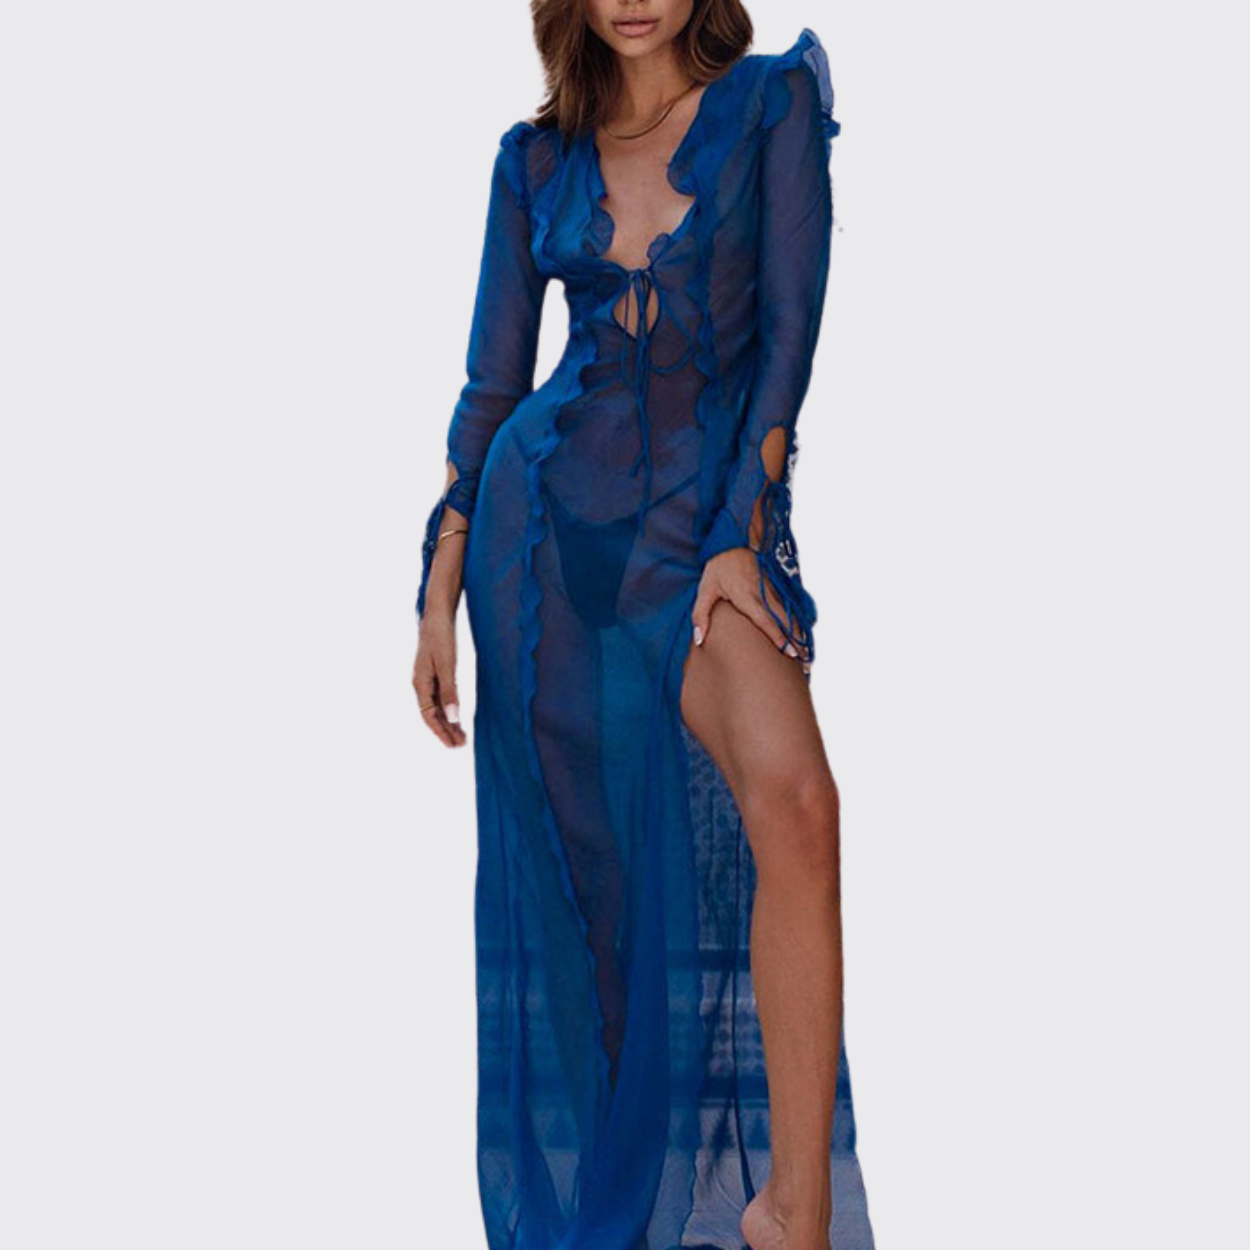 Blue Sheer Maxi Cover Up Dress With Ruffle Details